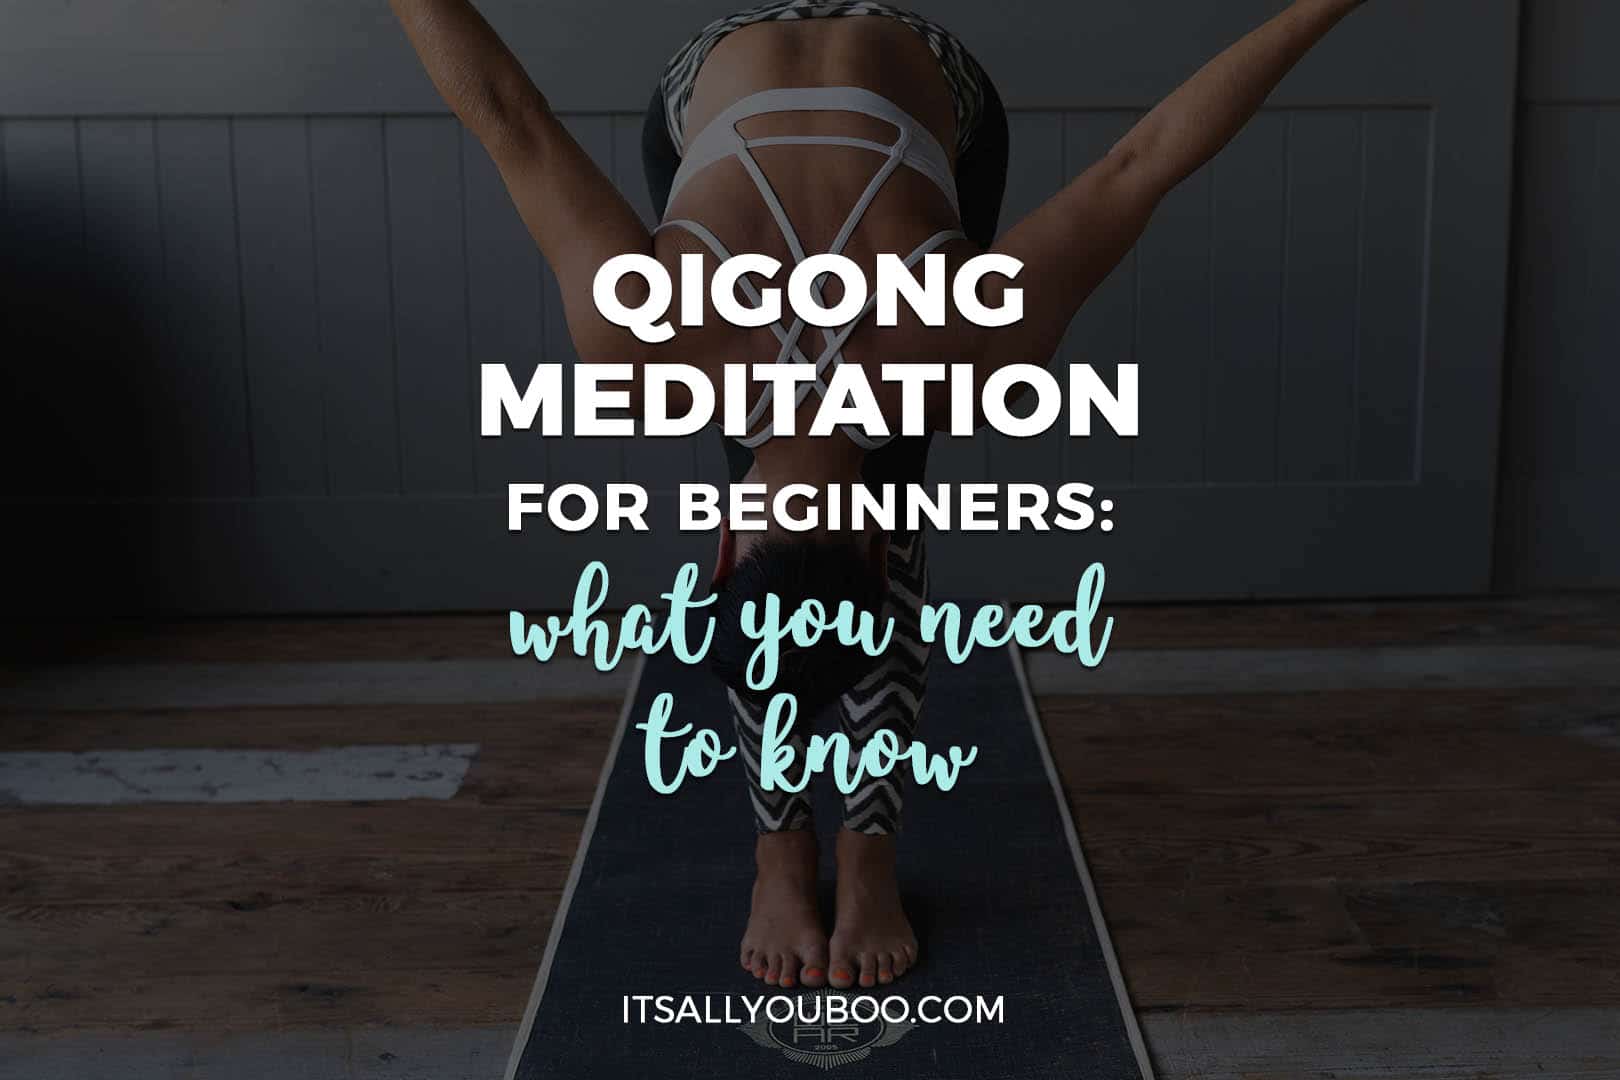 Qigong Meditation for Beginners: What You Need to Know